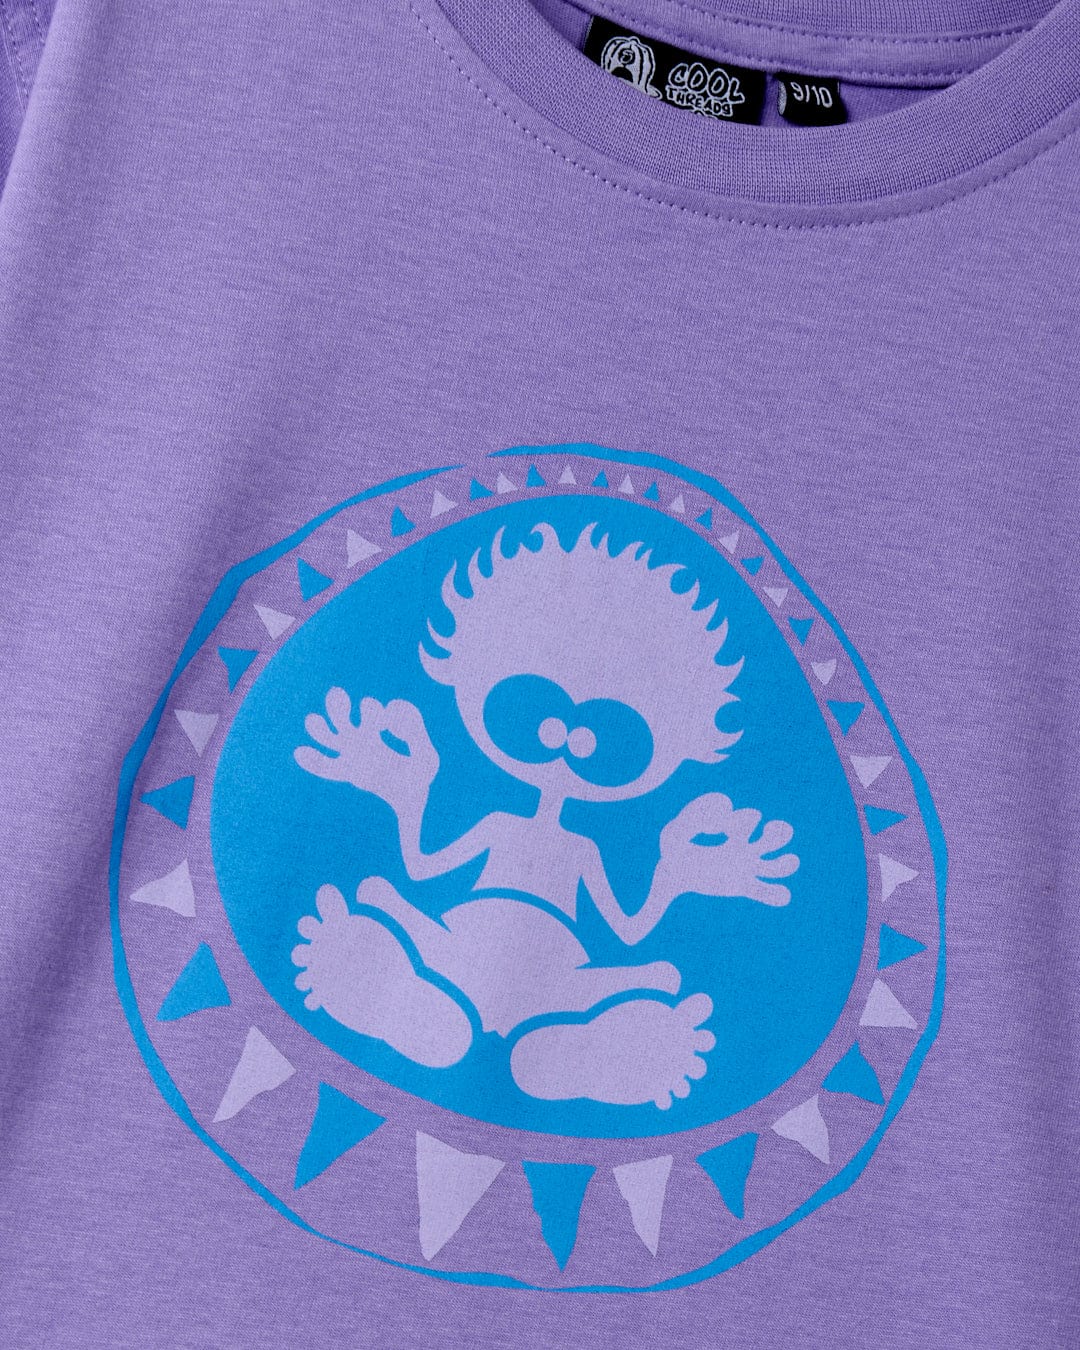 A Saltrock Back in the Day - Boys Short Sleeve T-Shirt - Purple with a graphic design in blue and white.